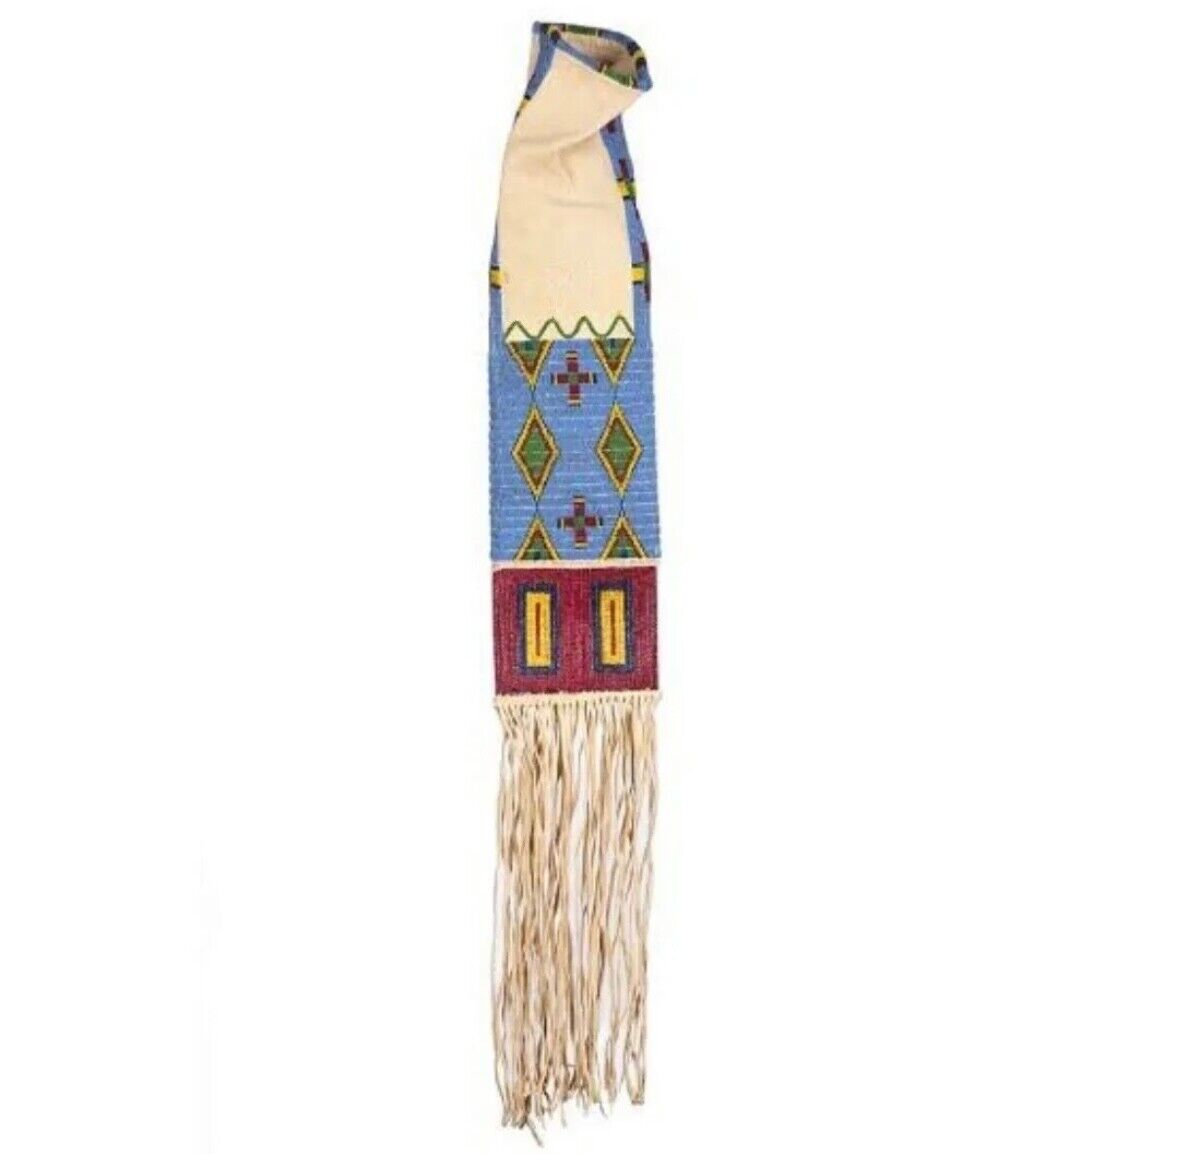 Native Indian Beaded Suede Leather tobacco Beaded pouch, hide tobacco pipe bag